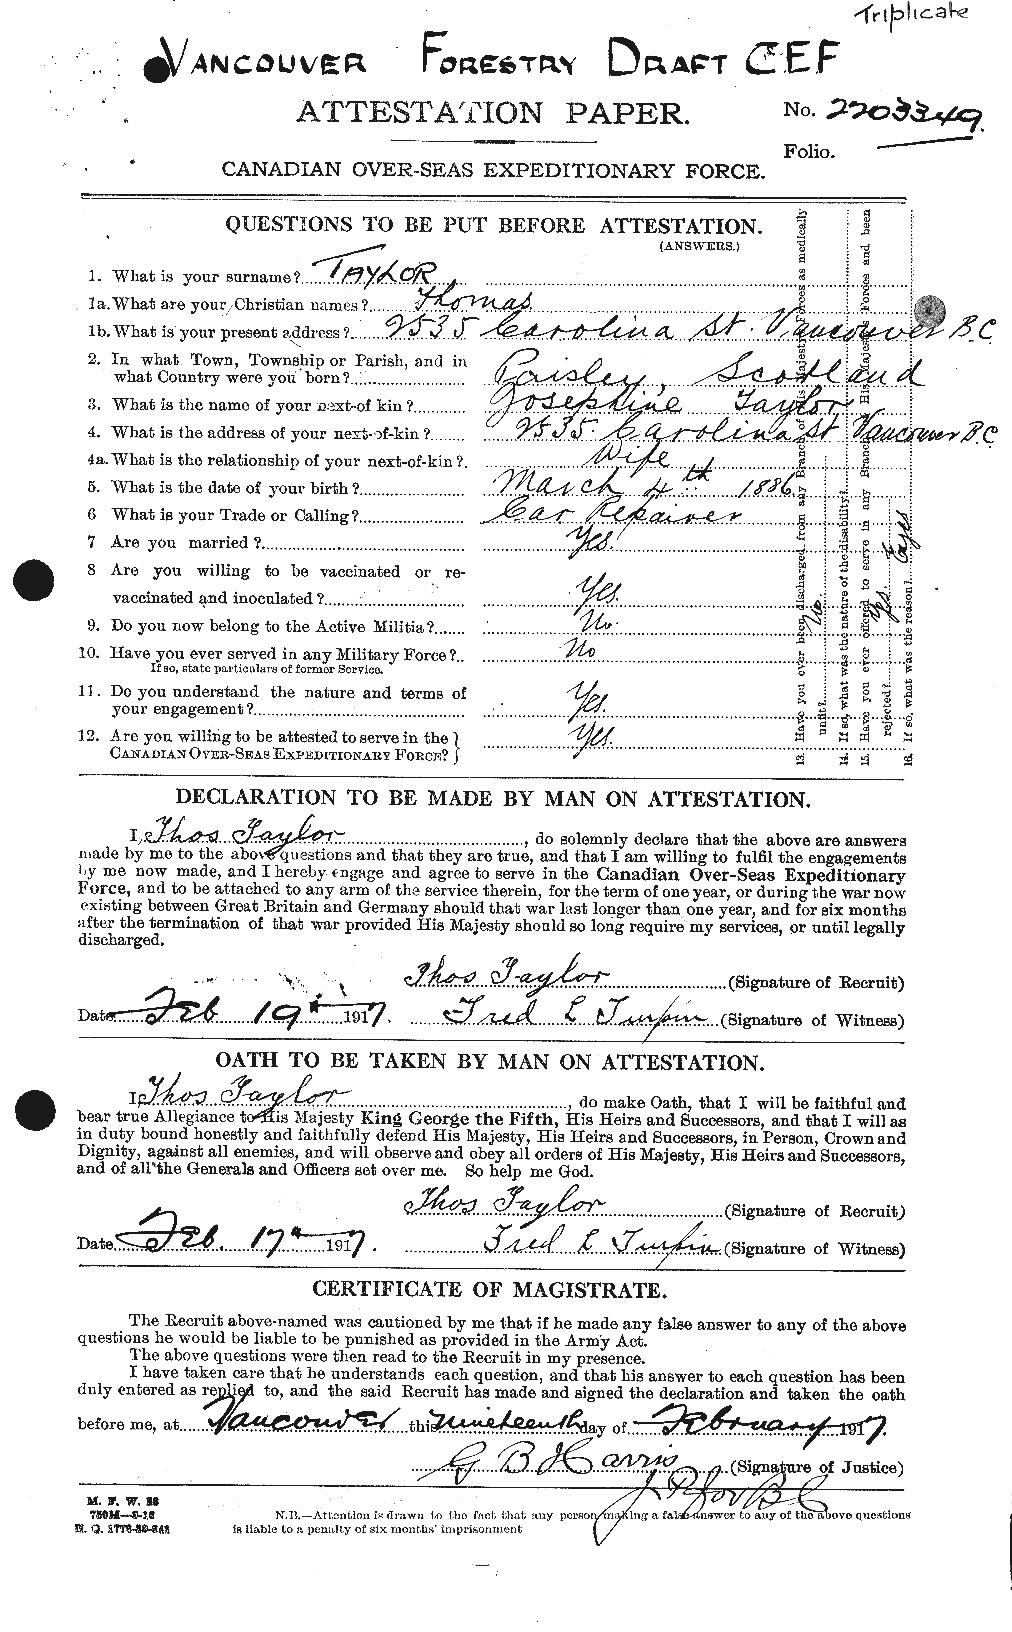 Personnel Records of the First World War - CEF 627955a